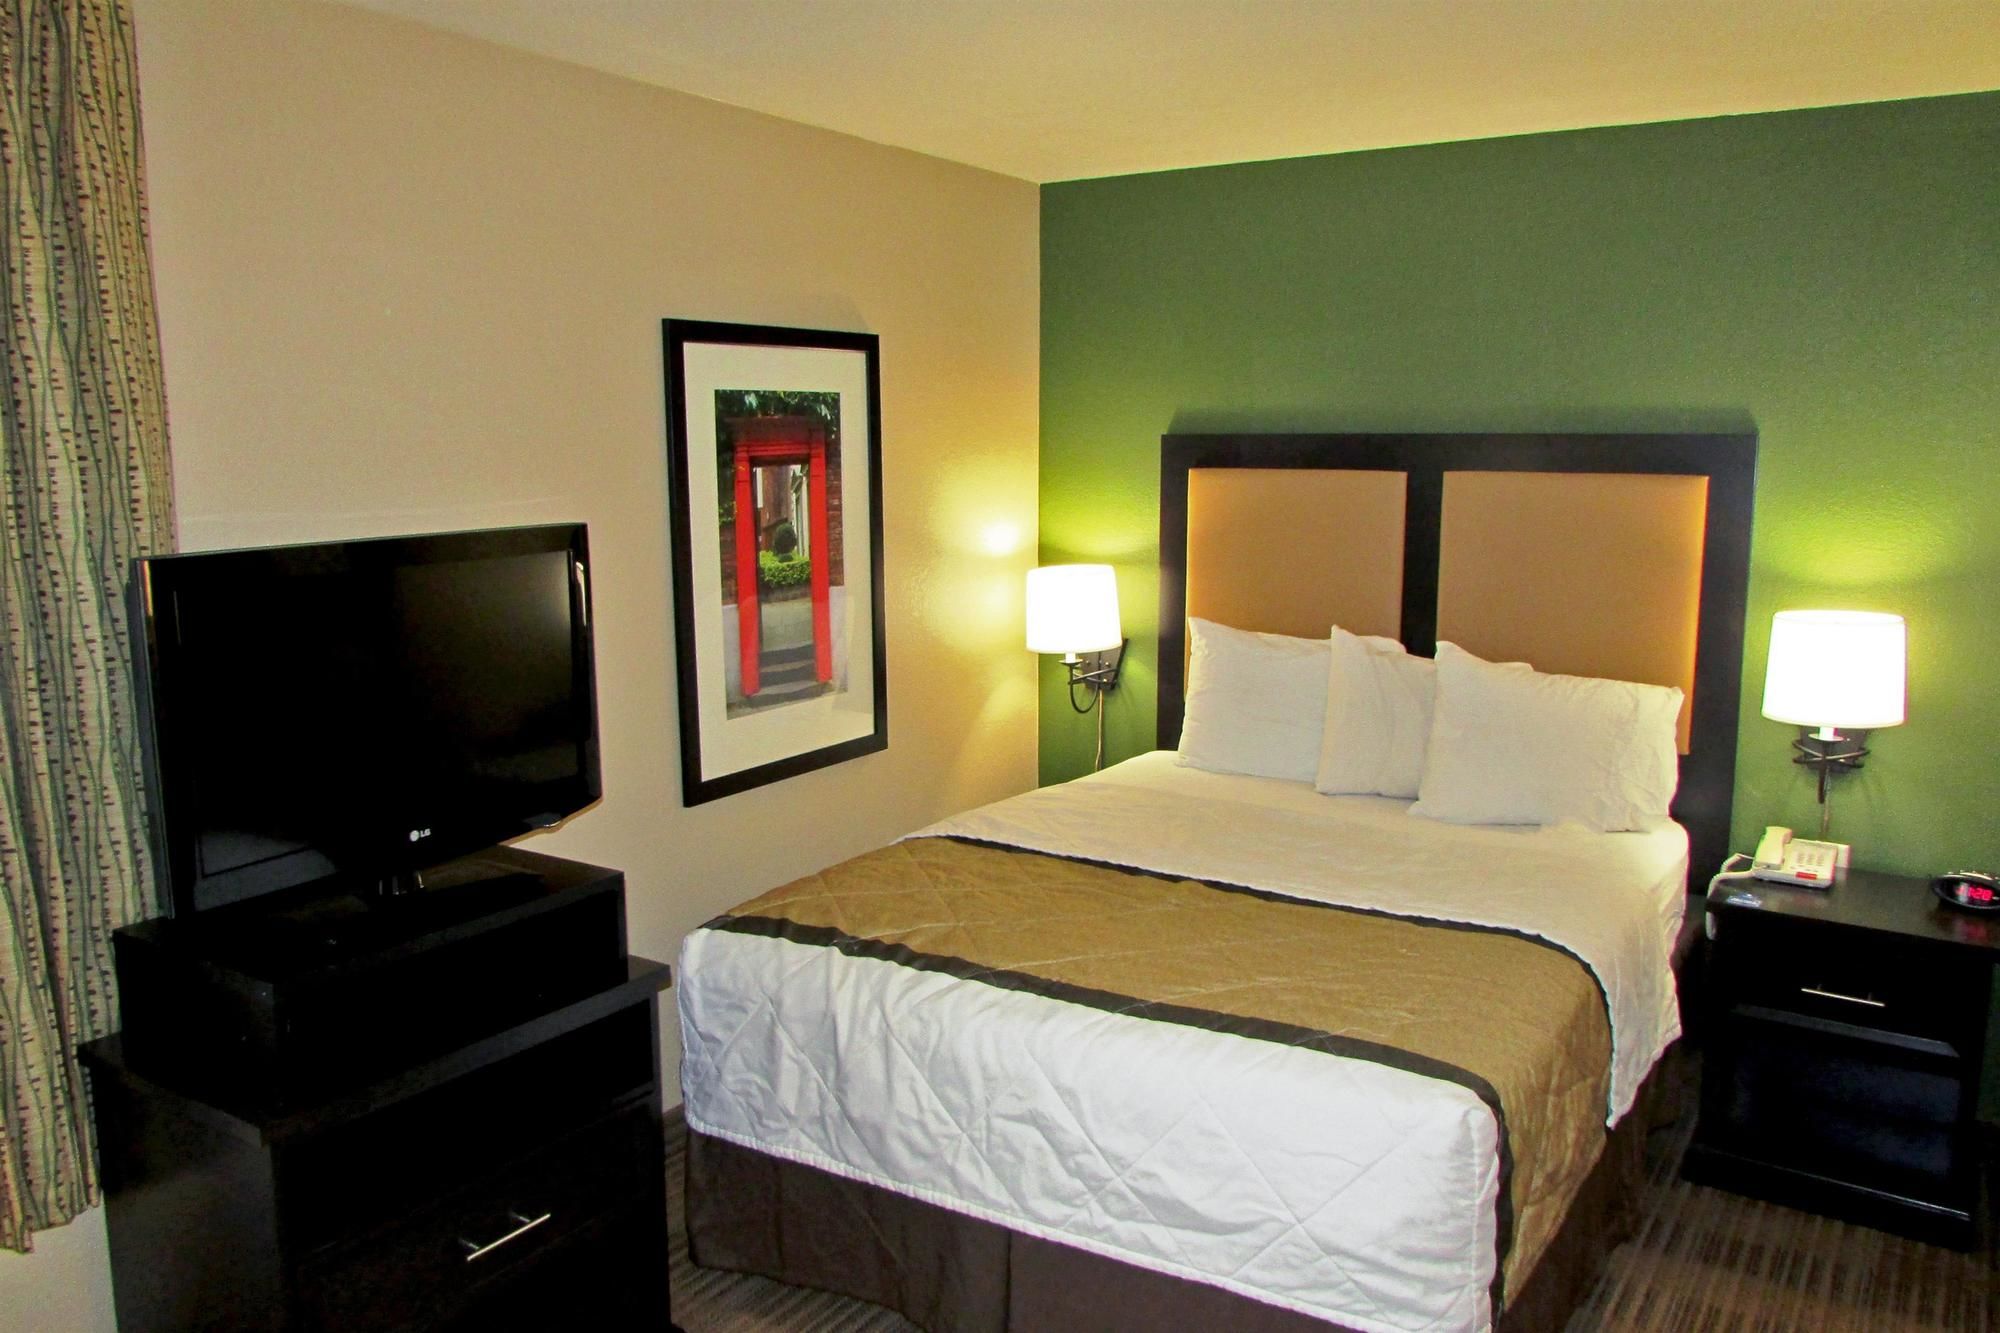 Extended Stay America Pleasanton Chabot Dr.